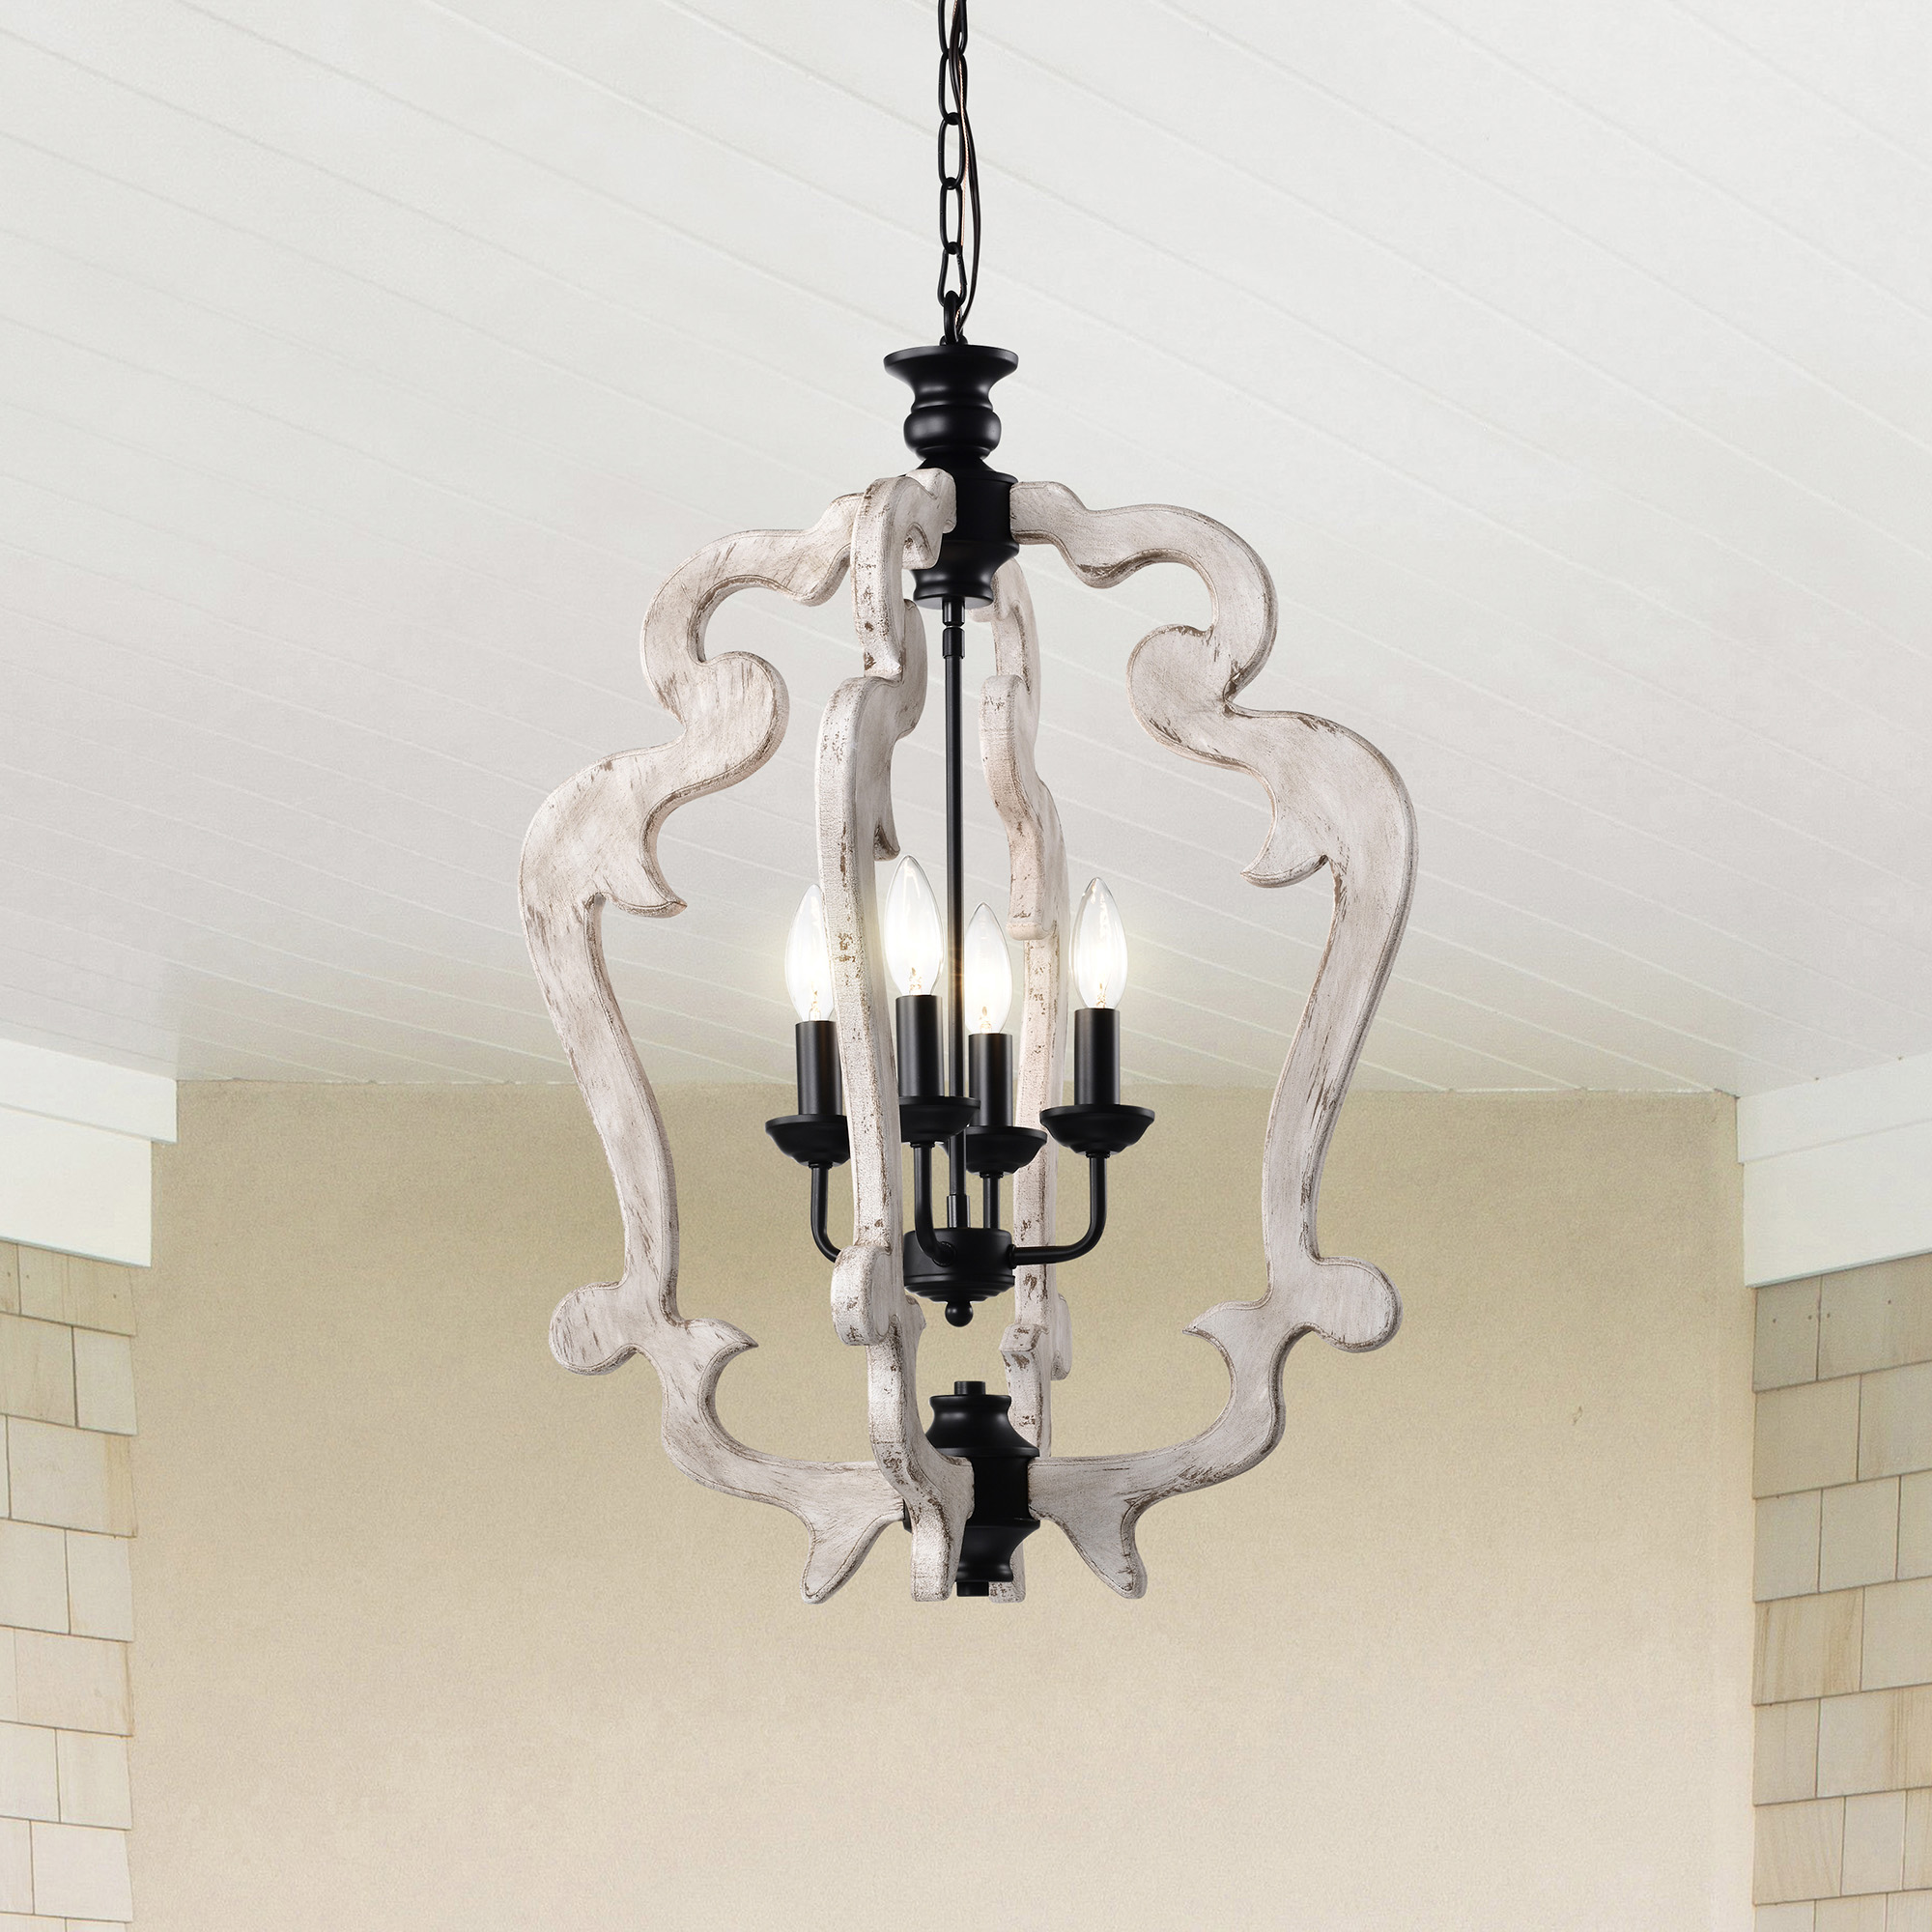 Biga 20 in. 4-Light Indoor Matte Black and Weathered White Finish Chandelier with Light Kit